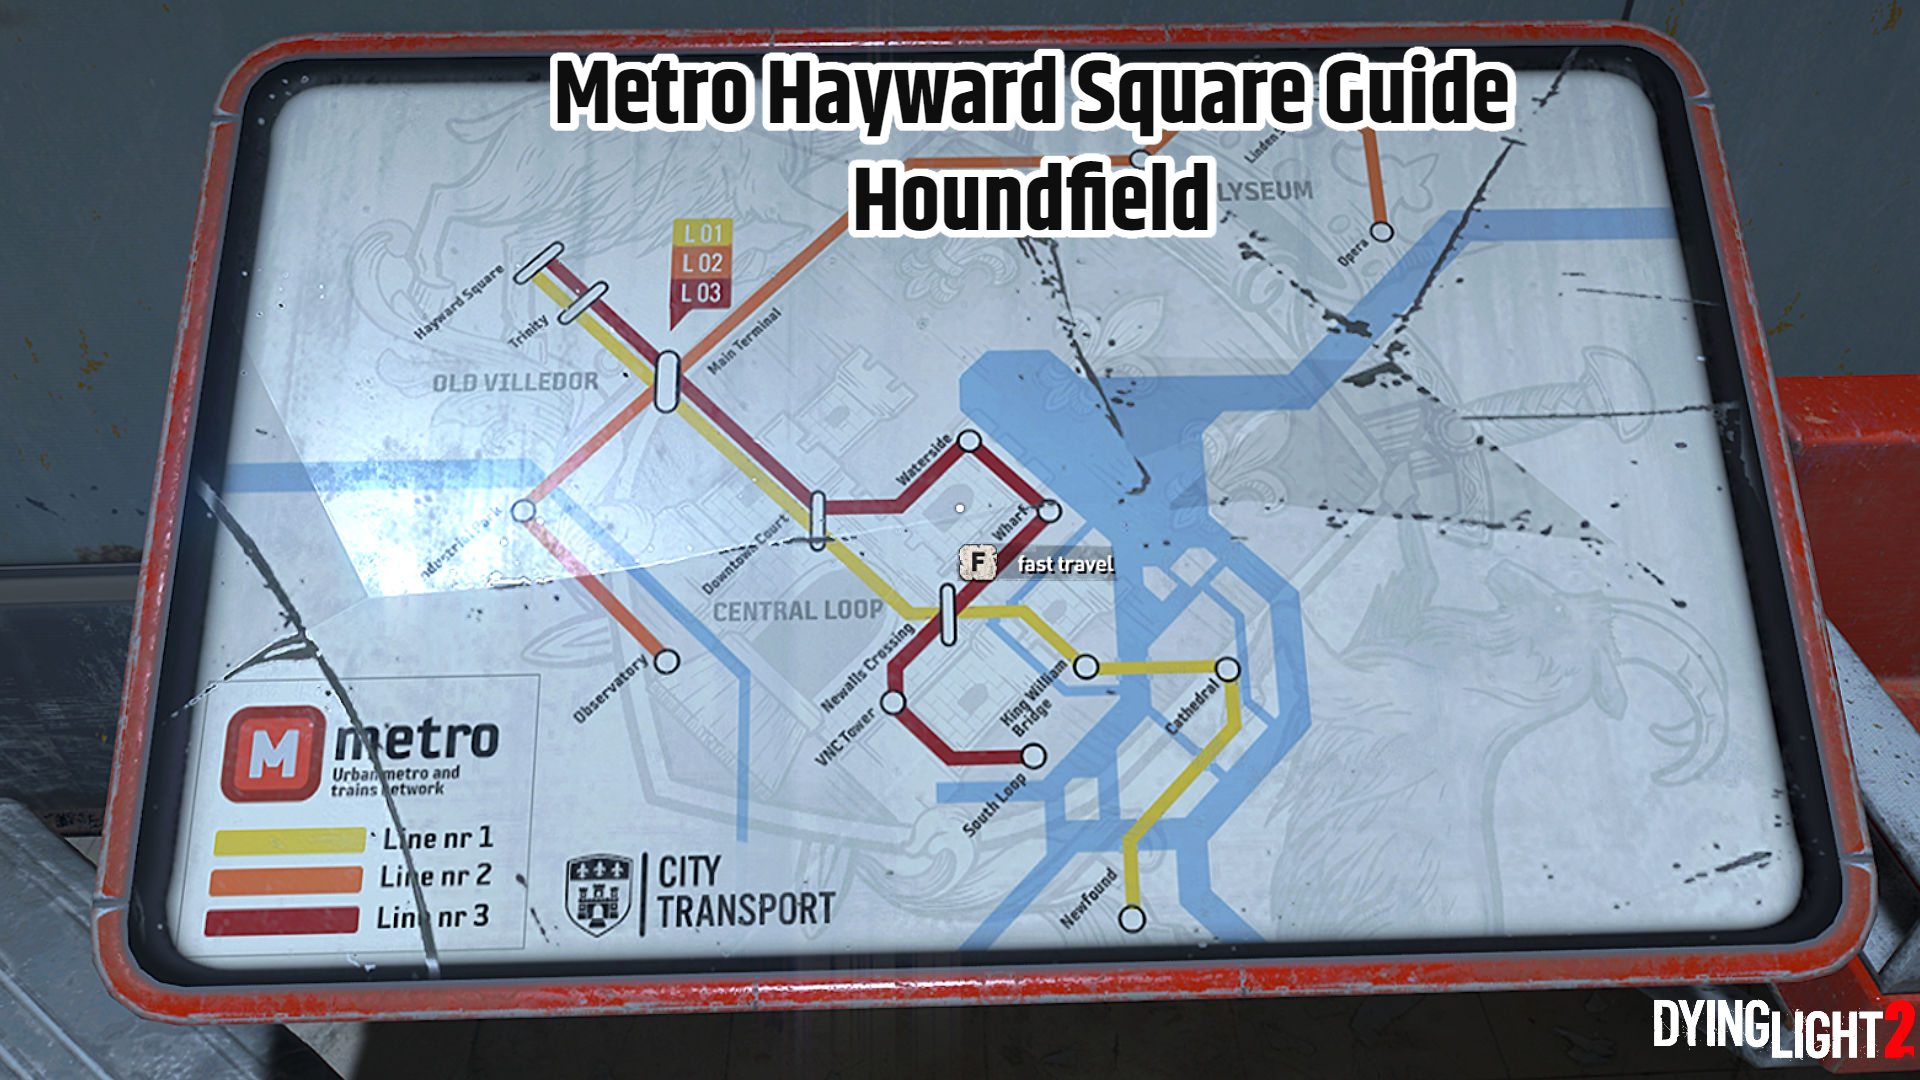 You are currently viewing Dying Light 2 Metro Hayward Square Guide Houndfield